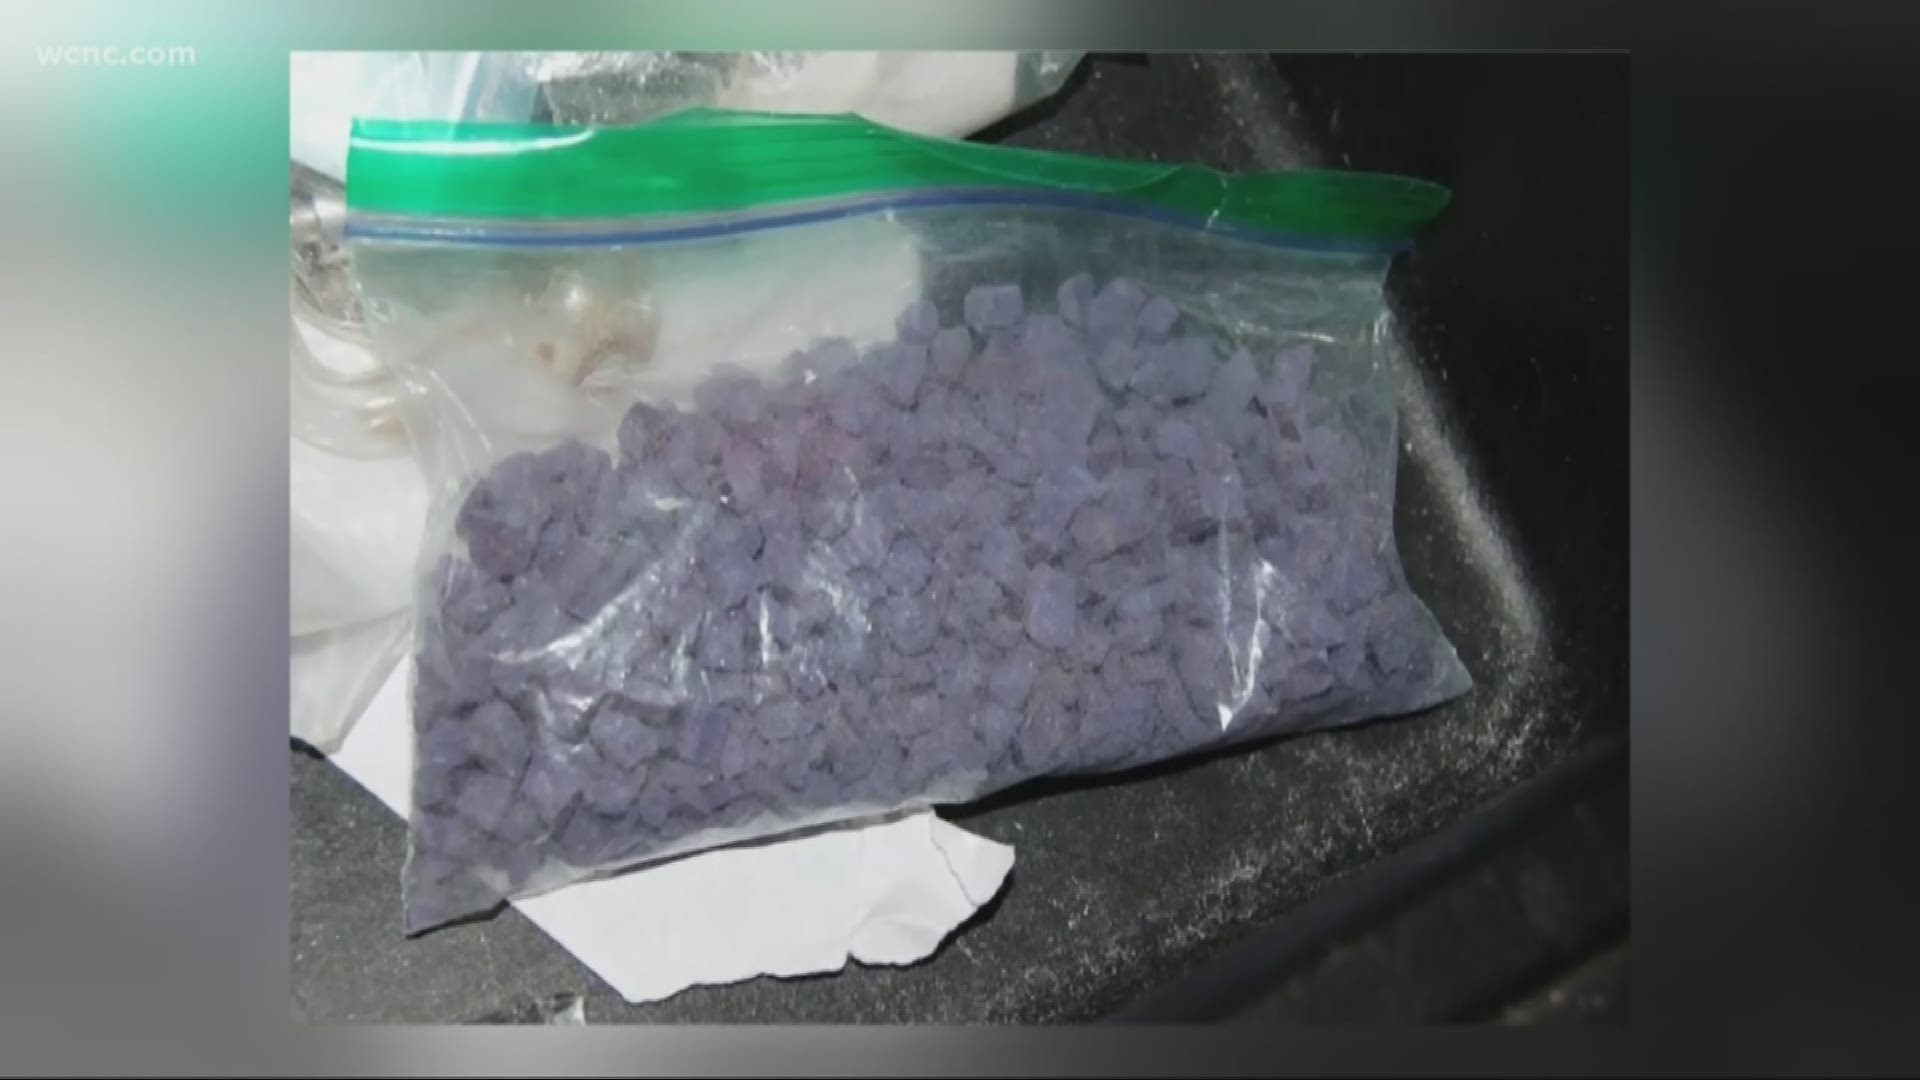 Across the Northern border, a drug called 'purple heroin' or 'purp' for short is gaining speed. It's far more powerful than street heroin, and people are dying from overdoses in its wake.